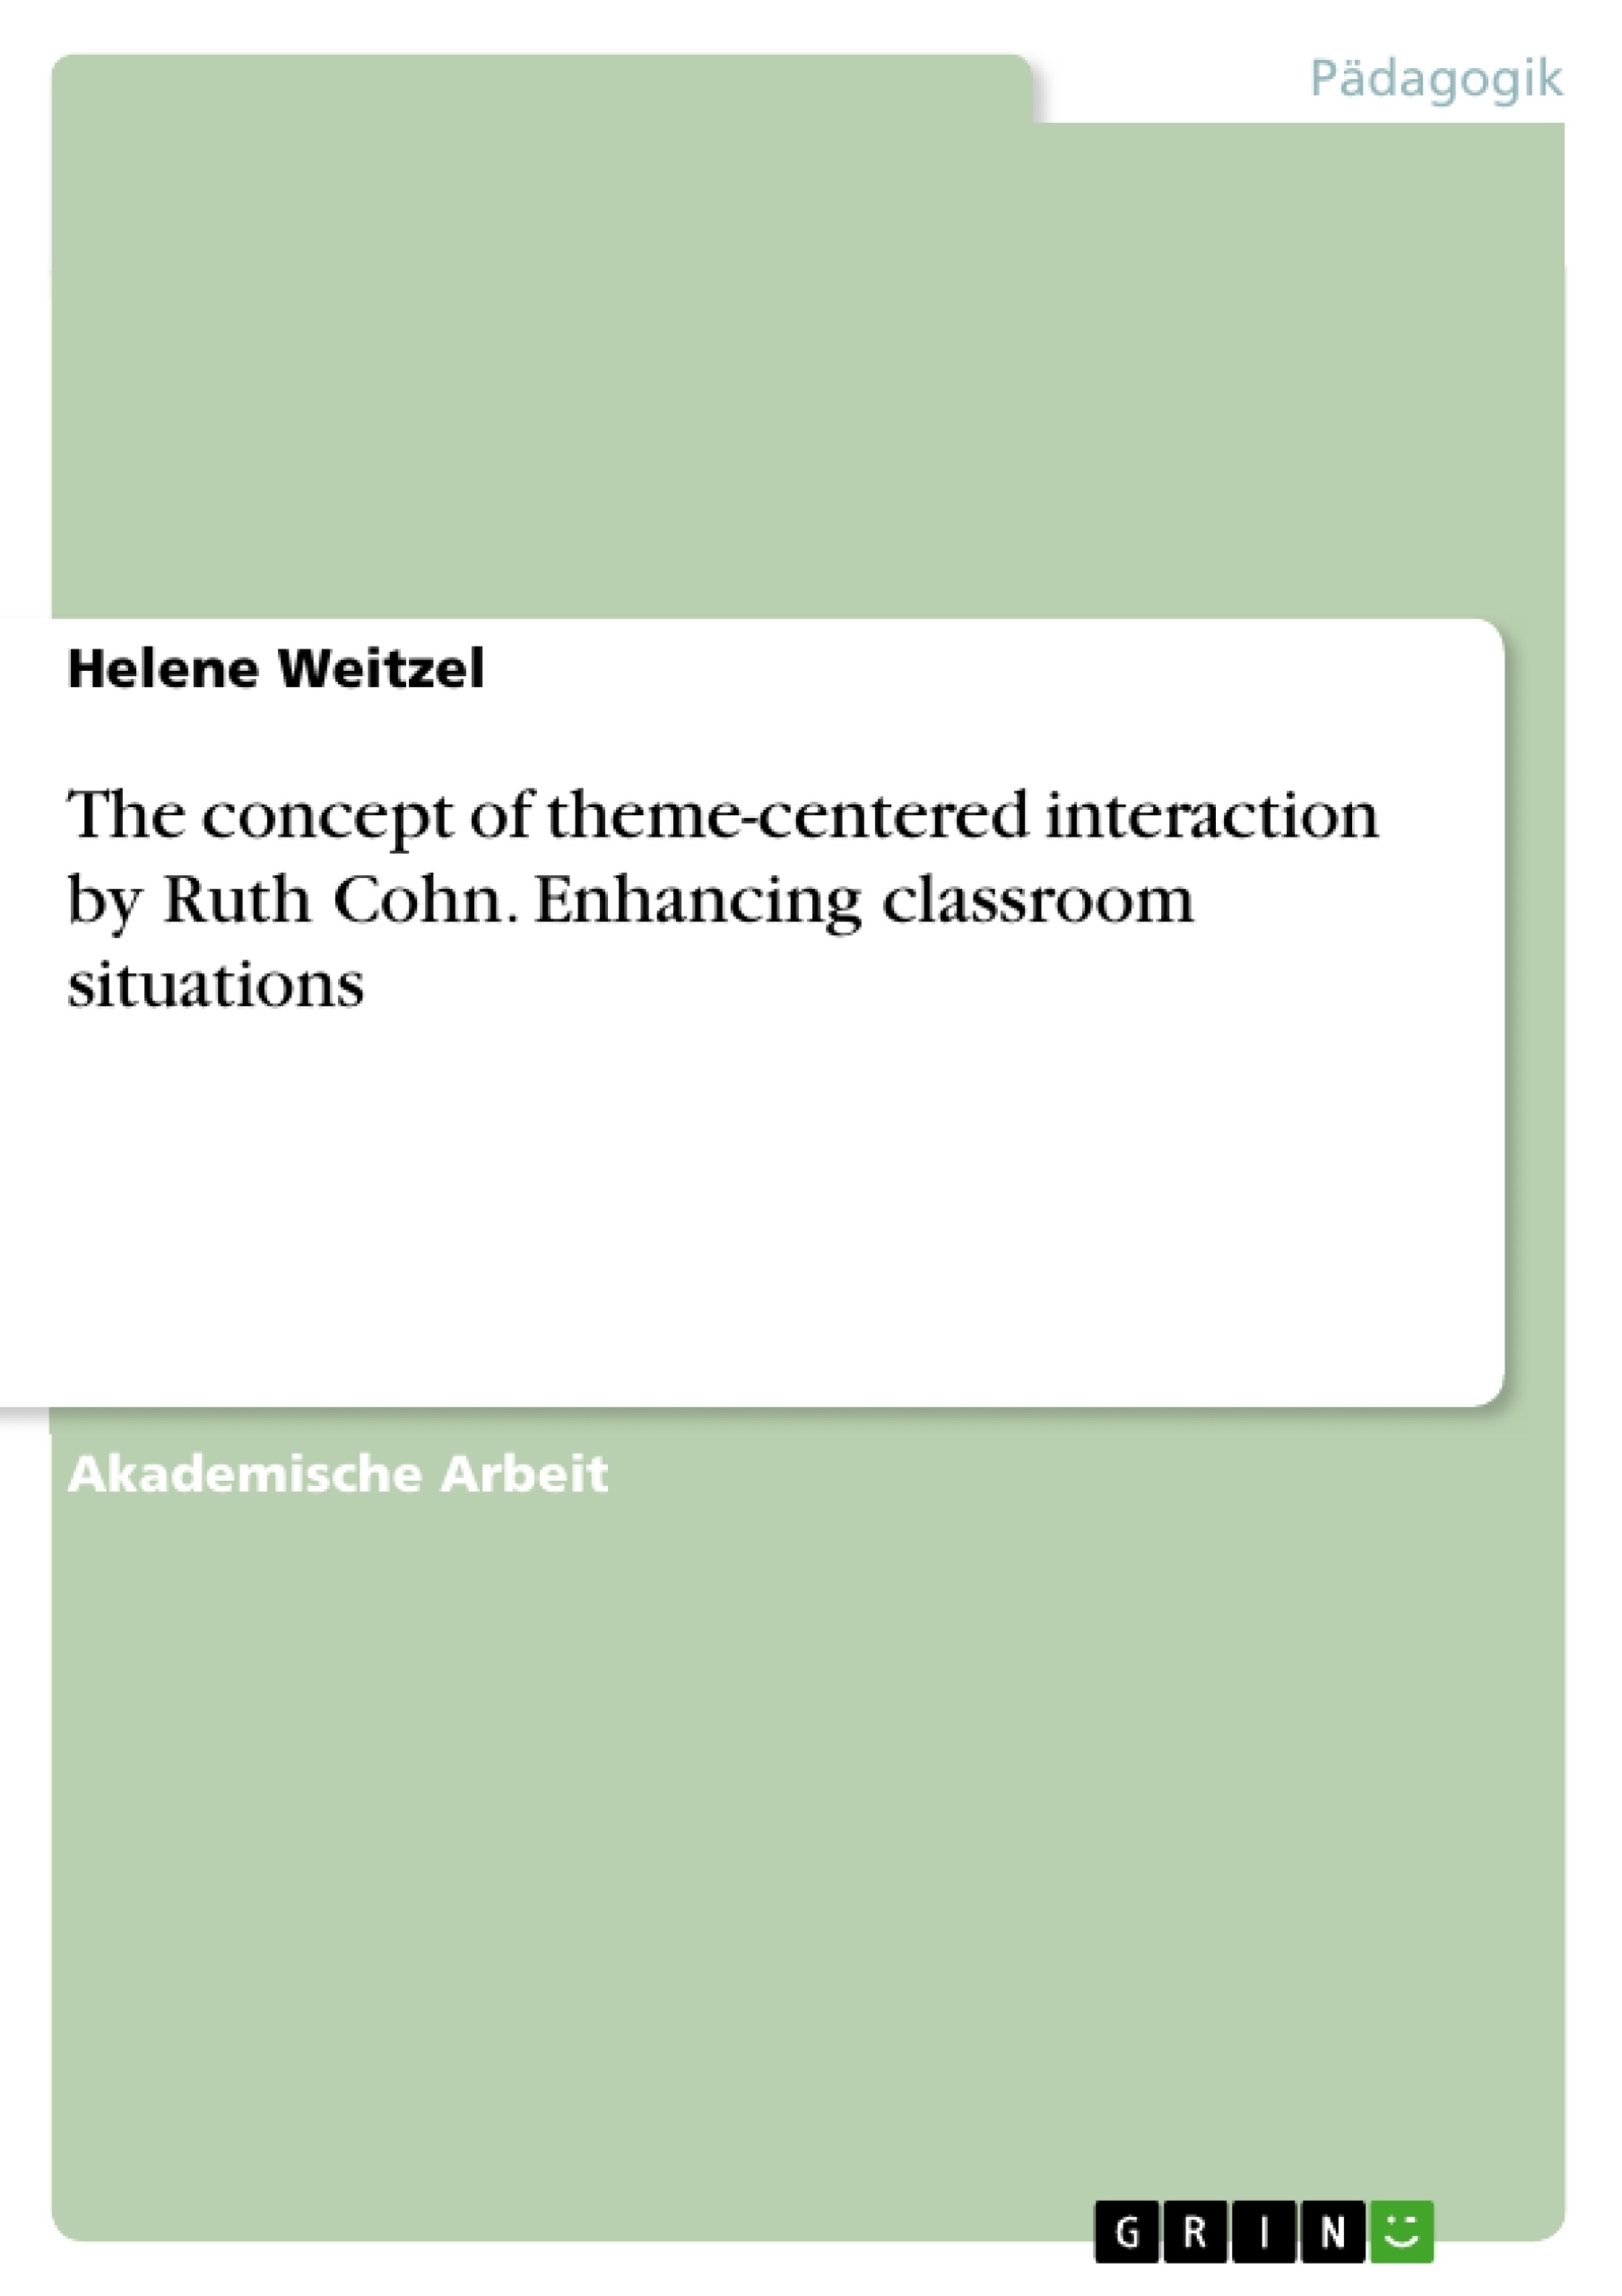 Titel: The concept of theme-centered interaction by Ruth Cohn. Enhancing classroom situations